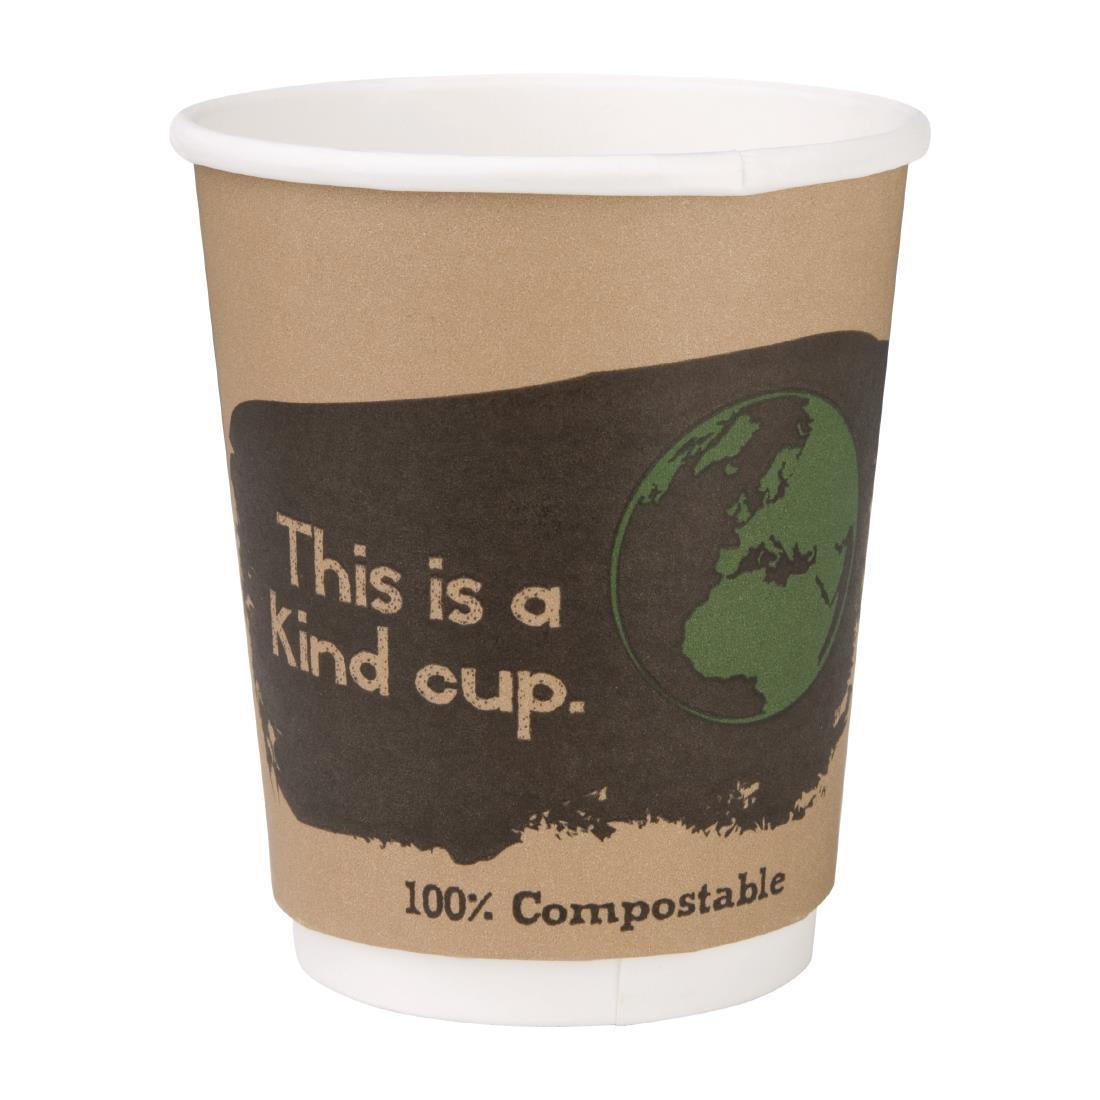 Fiesta Compostable Coffee Cups Double Wall 227ml / 8oz (Pack of 25) - DY984  - 1